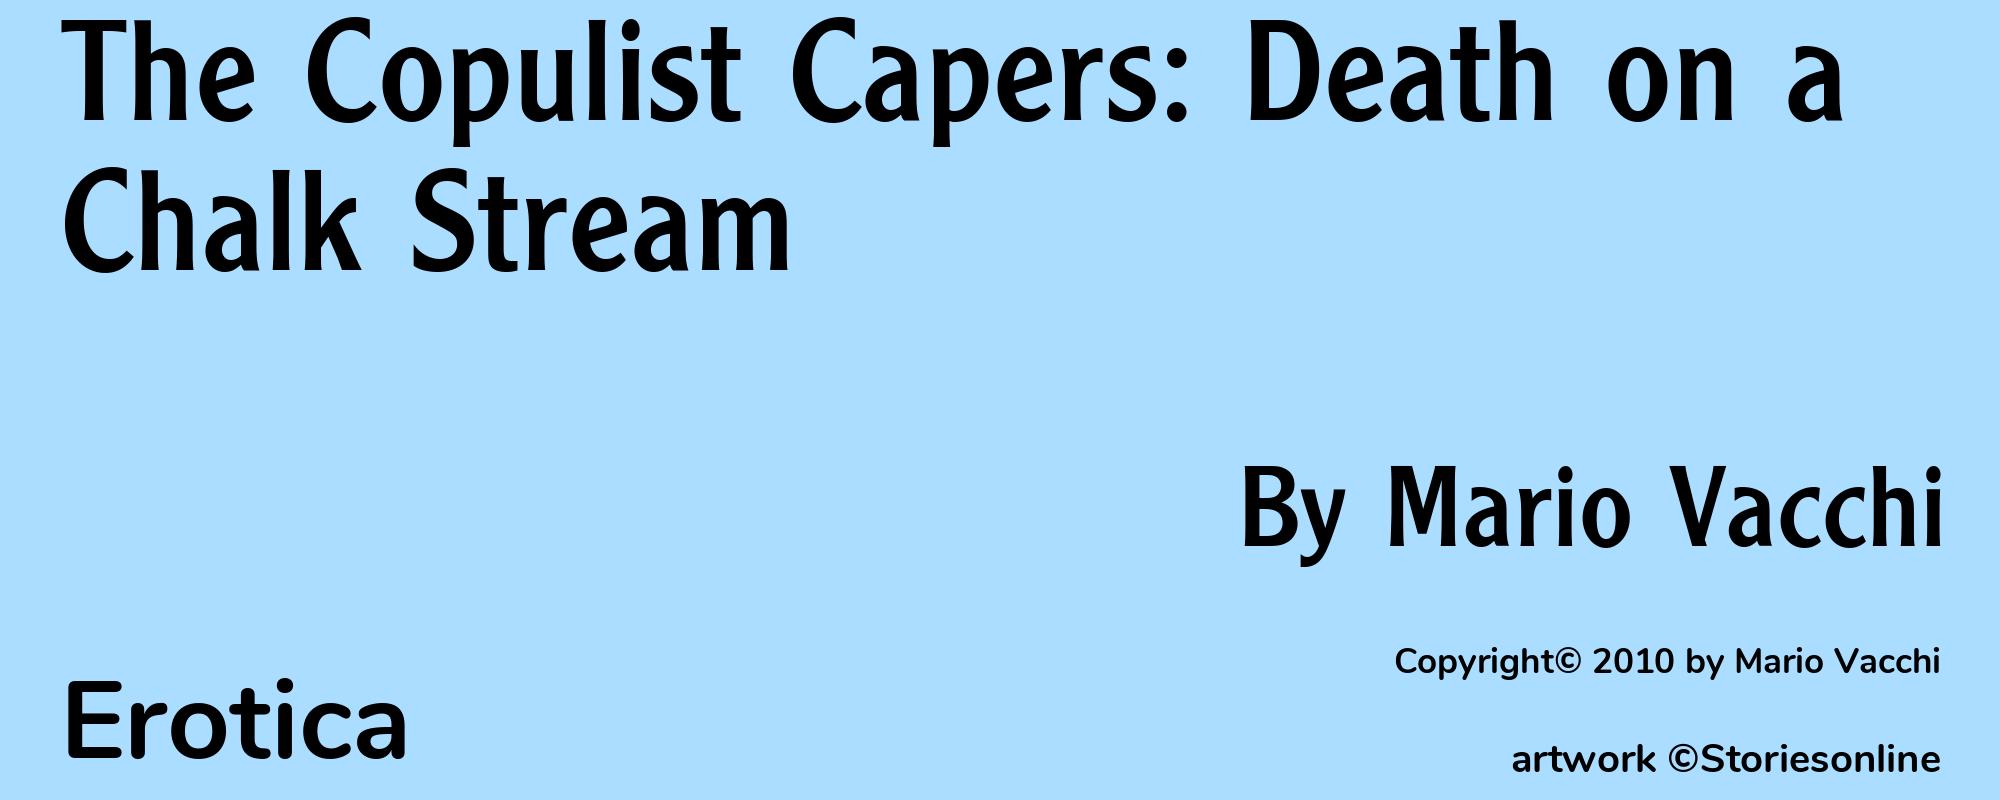 The Copulist Capers: Death on a Chalk Stream - Cover